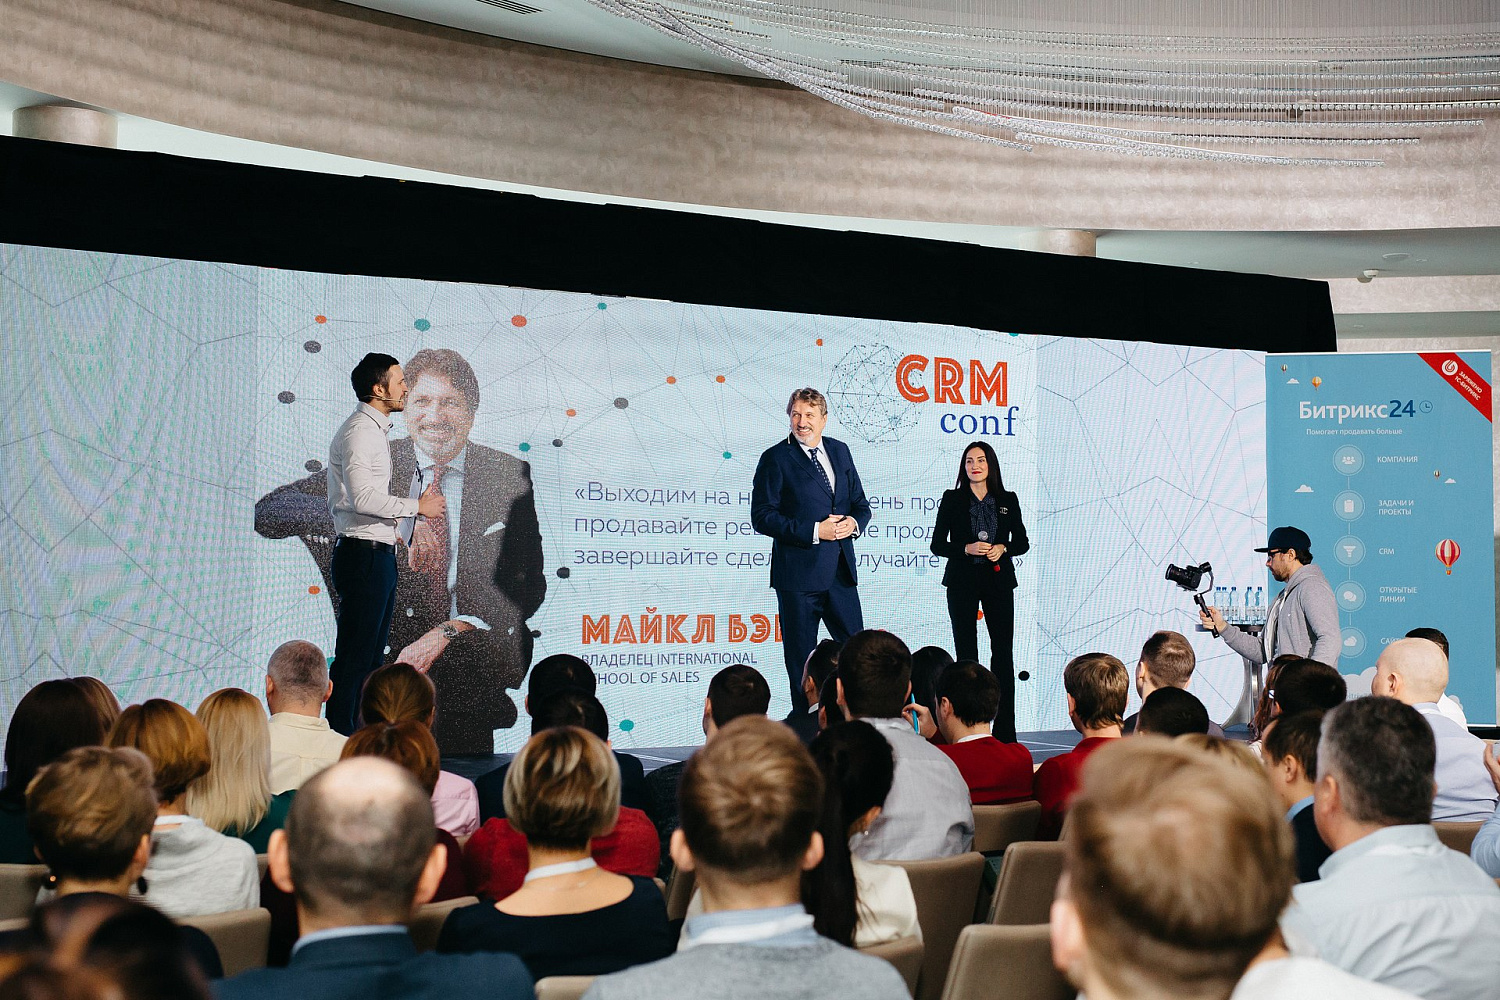 CRM Conference 2018